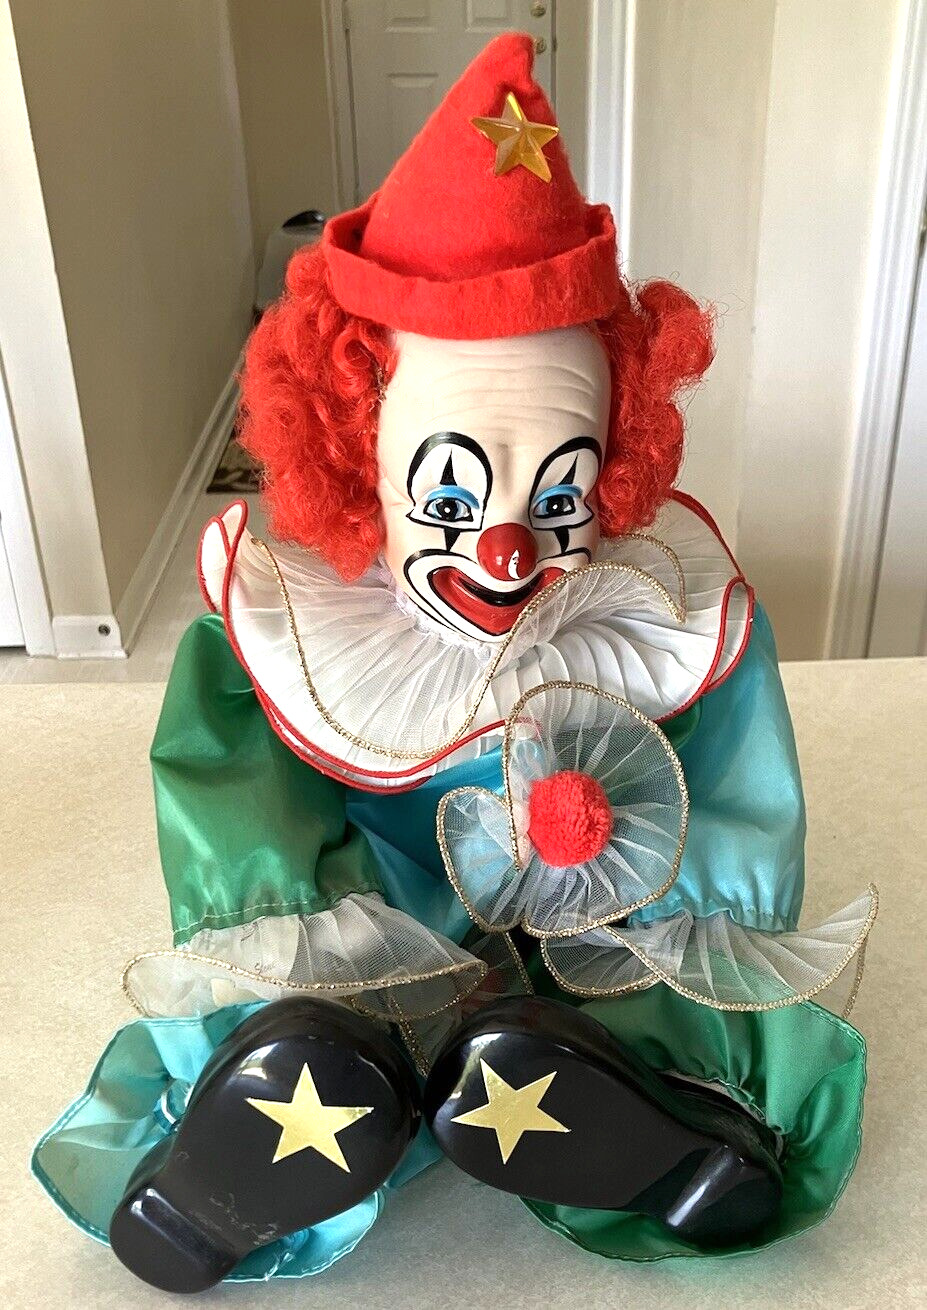 1990 Porcelain Clown Doll Twinkles Clowning Around by Amber Stone 16\